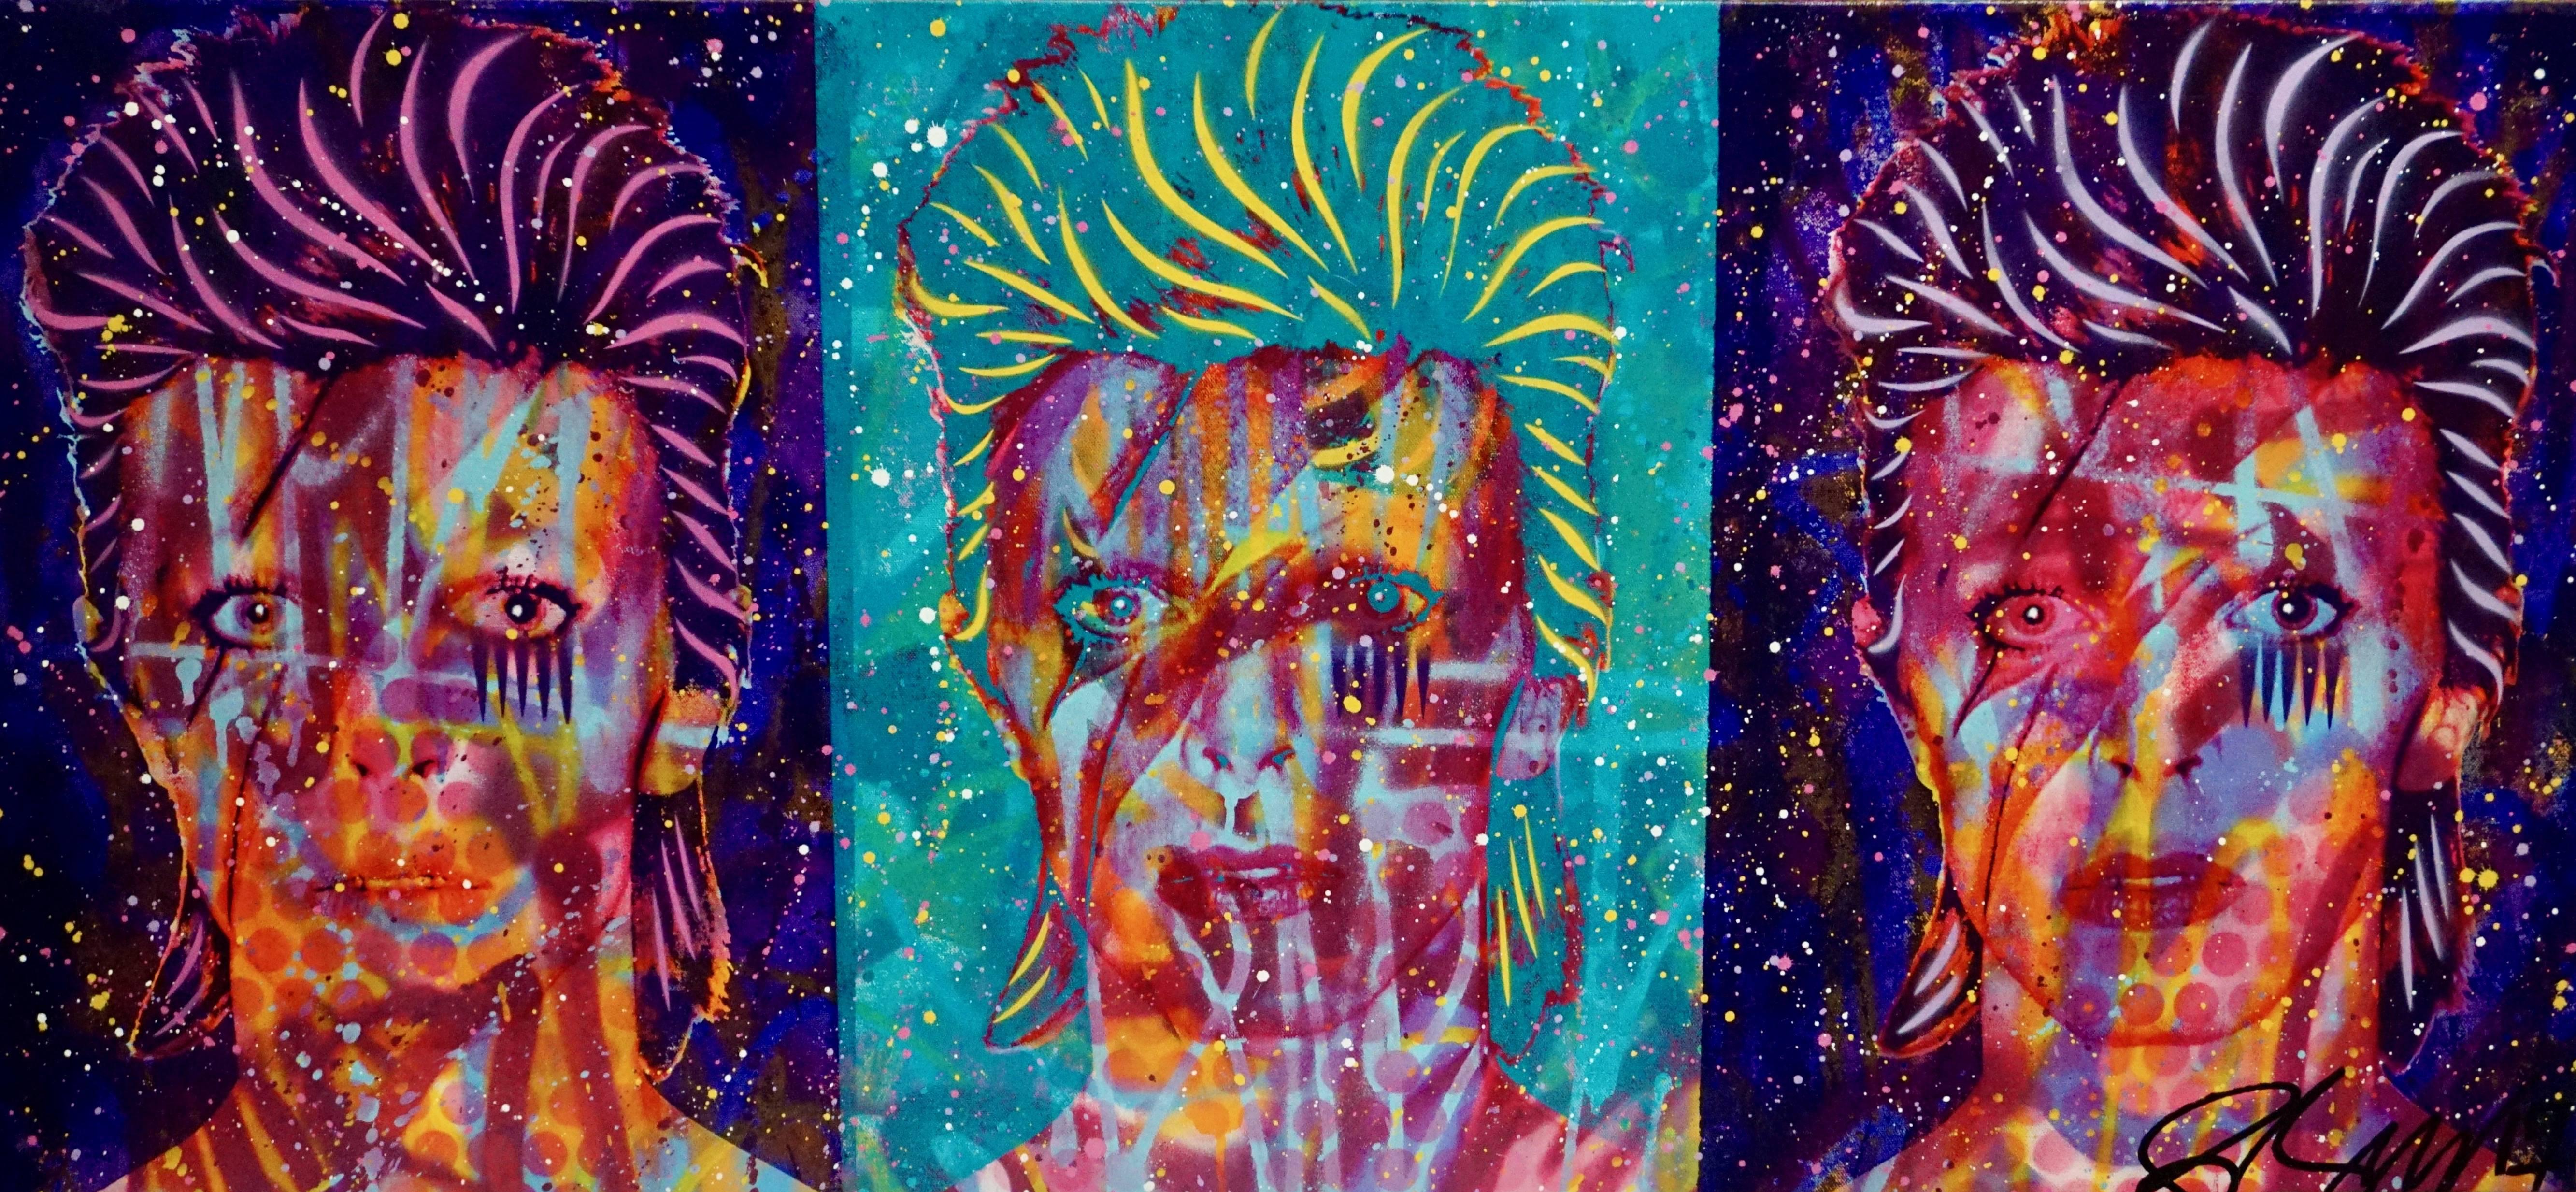 David Bowie Jagged Tears - Mixed Media Art by Rene Gagnon